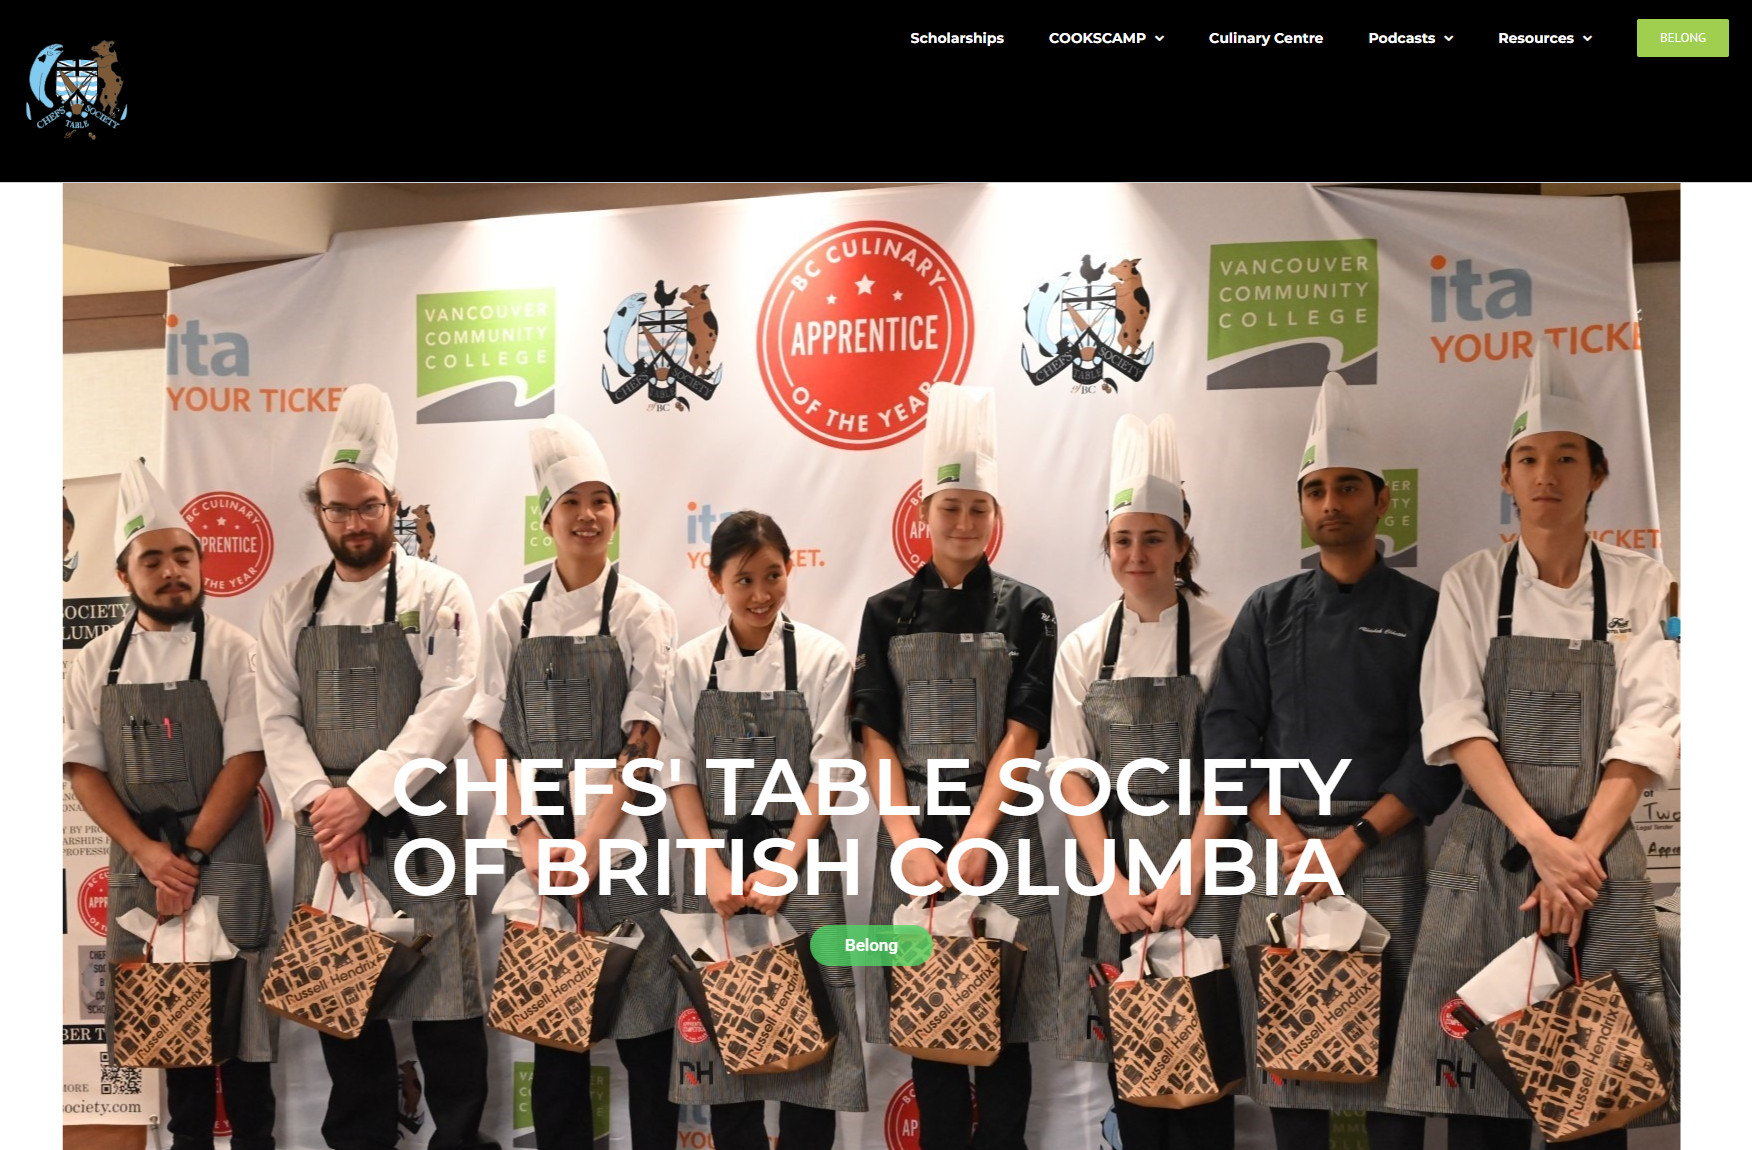 This restaurant blog is all about supporting food service providers in British Columbia with tips and collaboration opportunities 